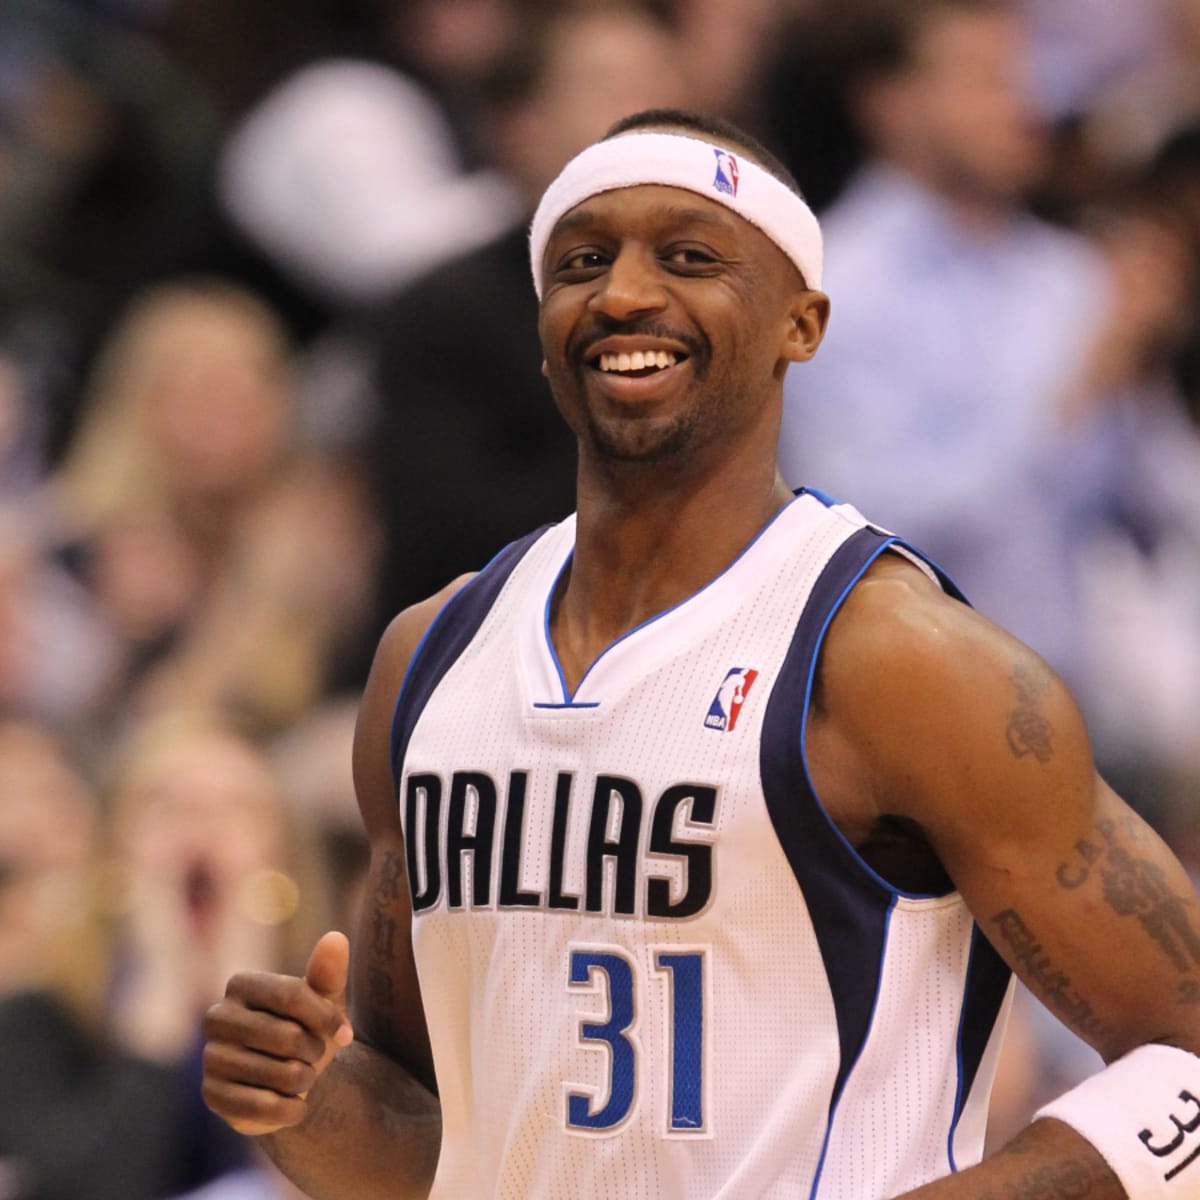 A look back at Jason Terry's role on the 1997 National